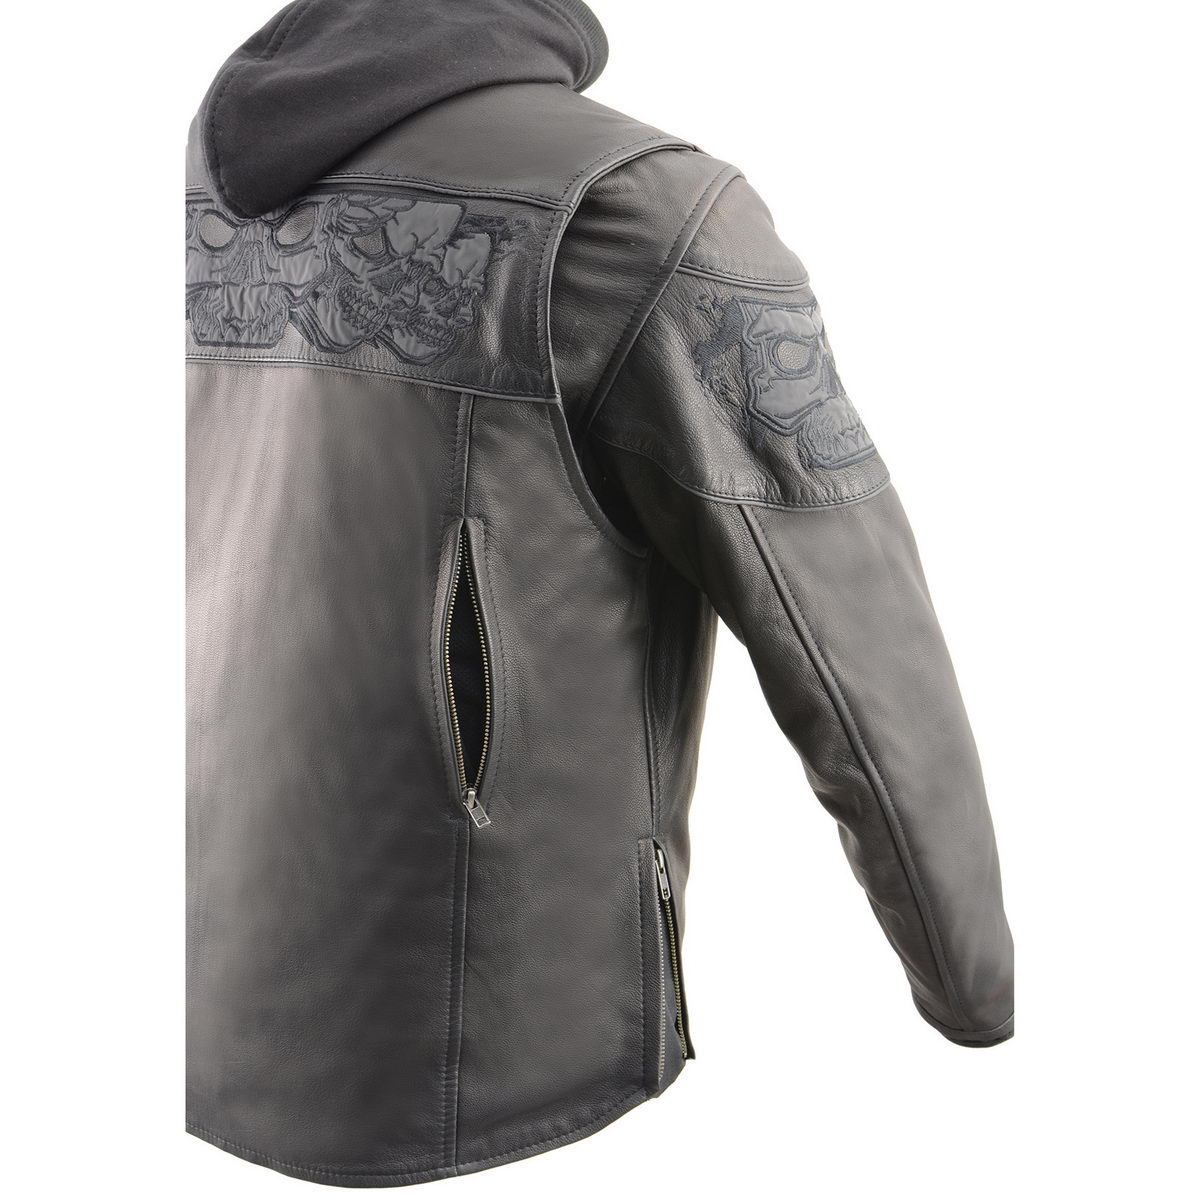 Milwaukee Leather MLM1563 Men's ‘Cross Over’ Black Leather Jacket with Reflective Skulls